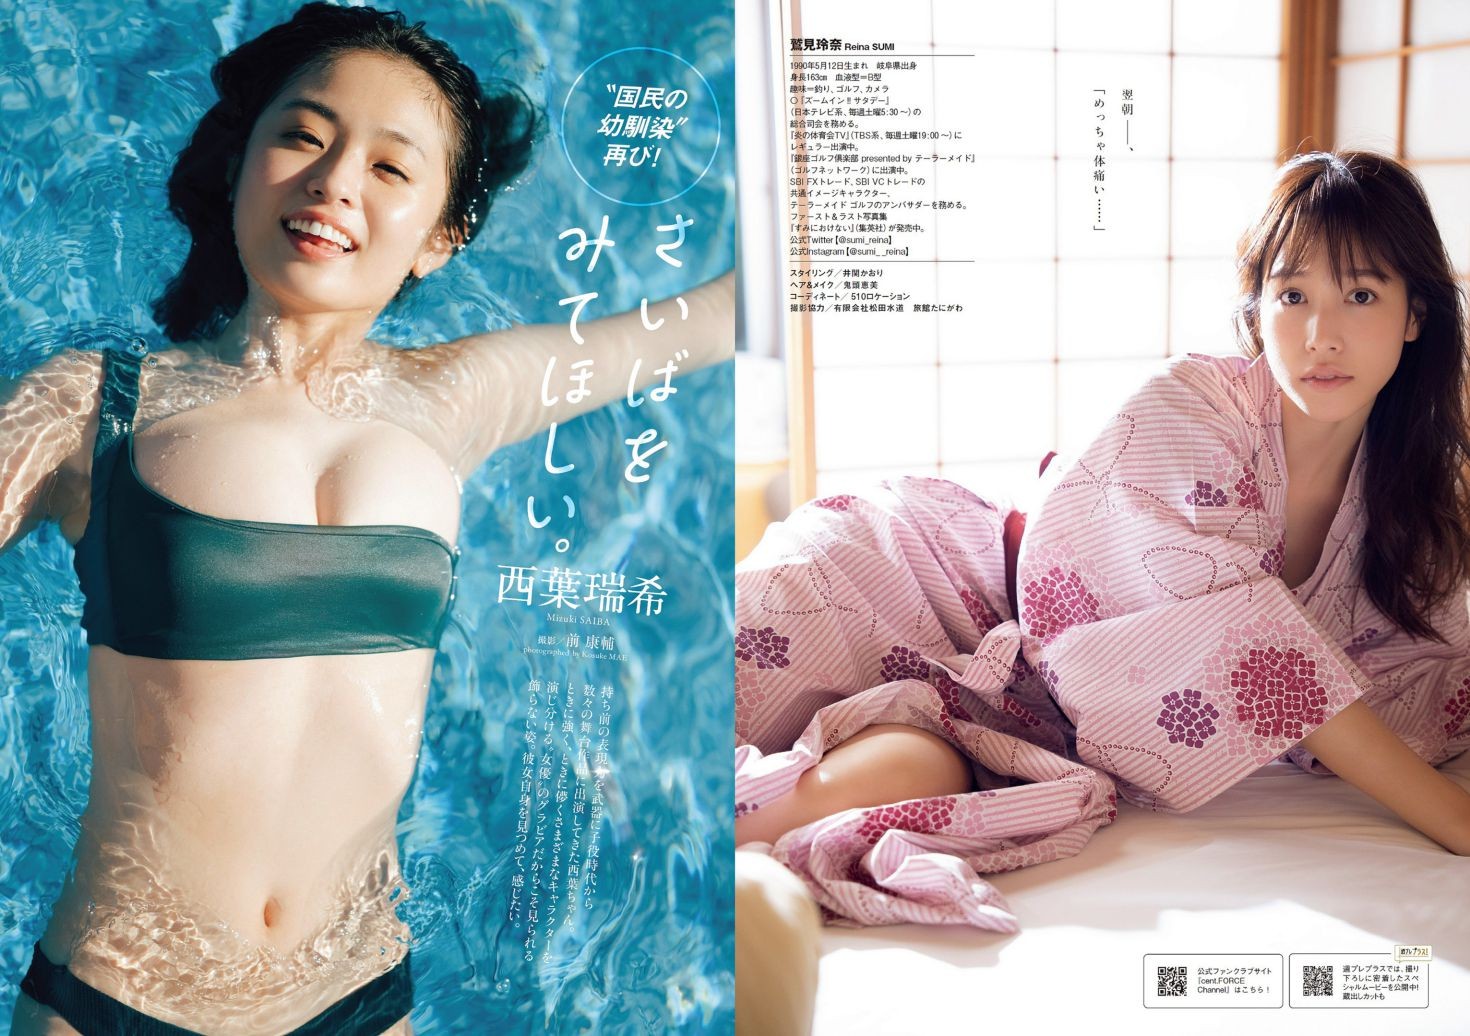 Weekly Playboy 2022 No.52 鷲見玲奈 西葉瑞希 青井春 吉田あかり 山岡雅弥 藤白れもん 藤木由貴 (7)